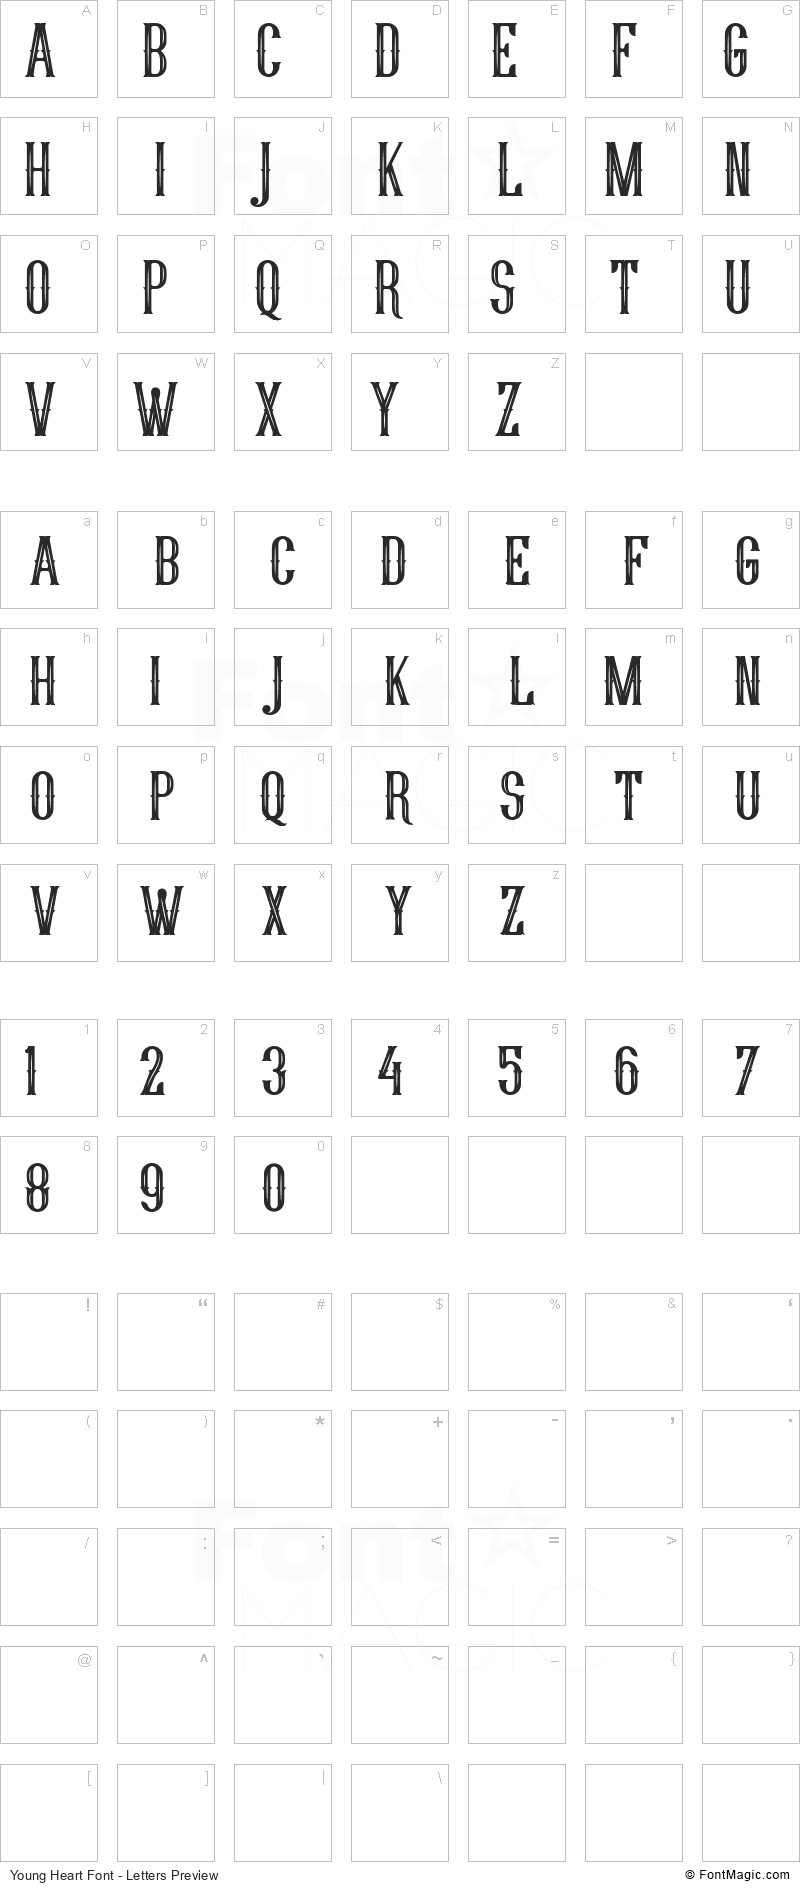 Young Heart Font - All Latters Preview Chart